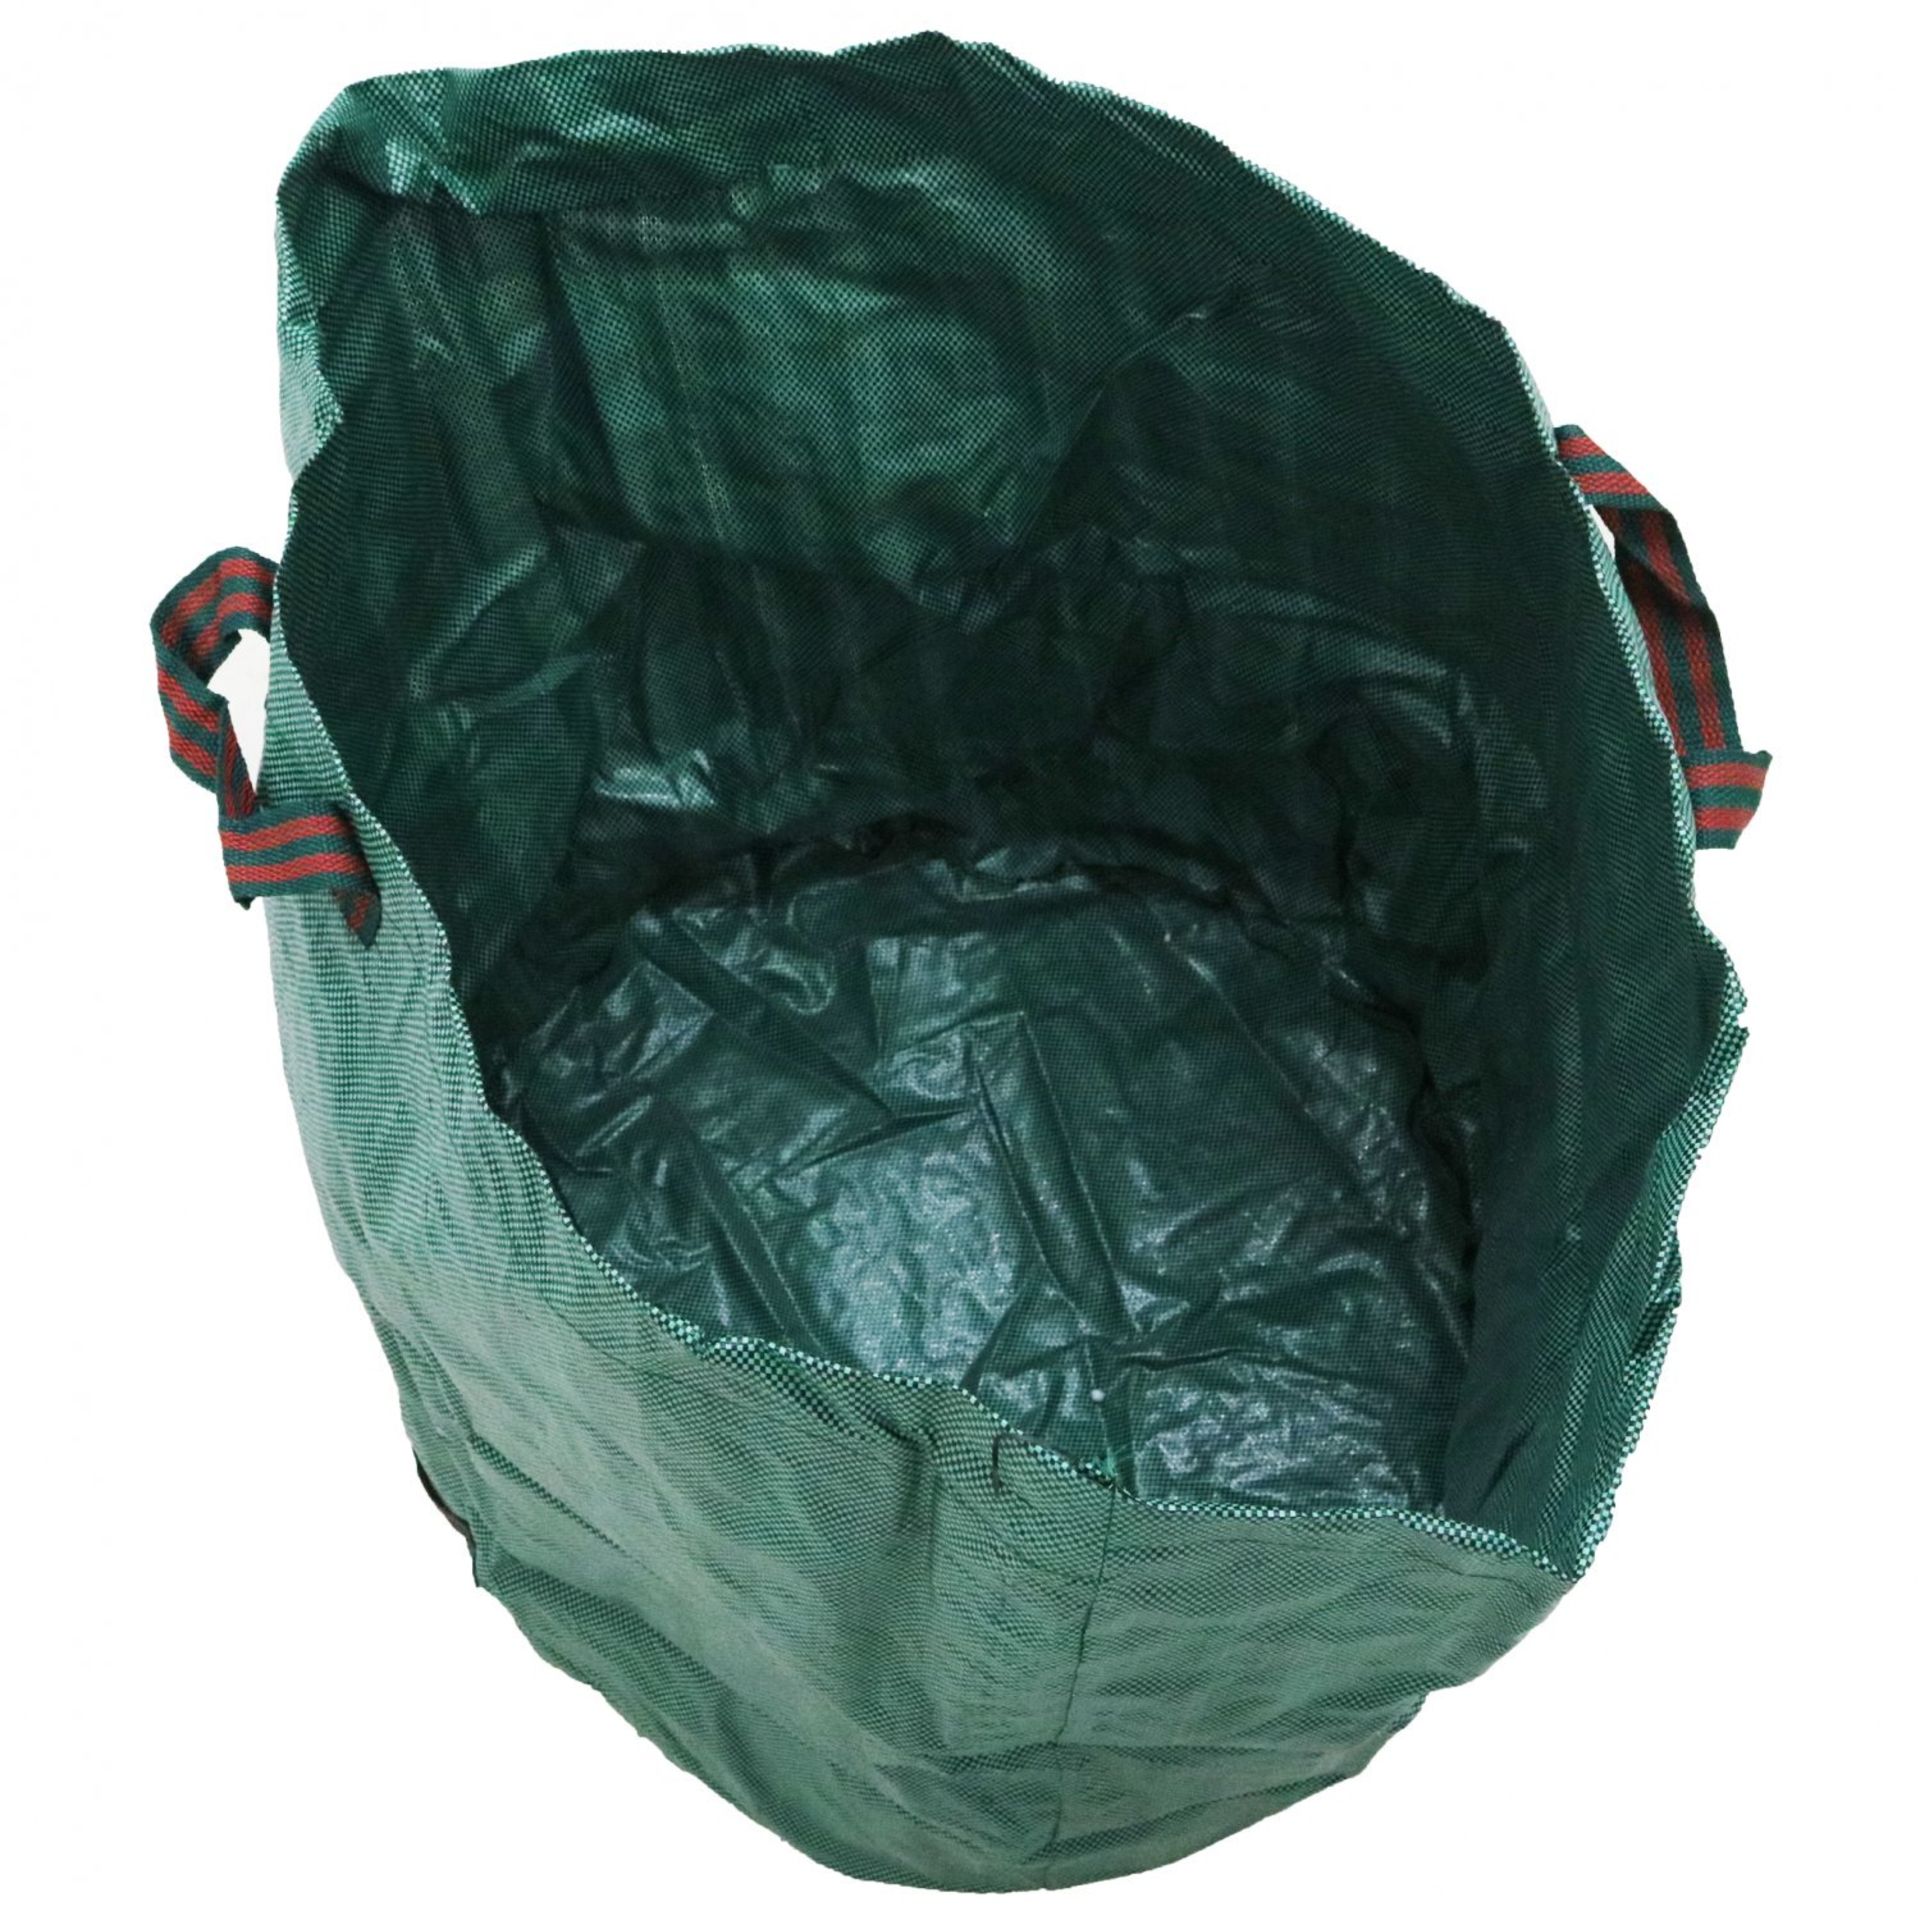 (RU74) Large Heavy Duty 270L Garden Waste Bags Sacks - Pack of 3 The garden waste bags are p... - Image 2 of 2